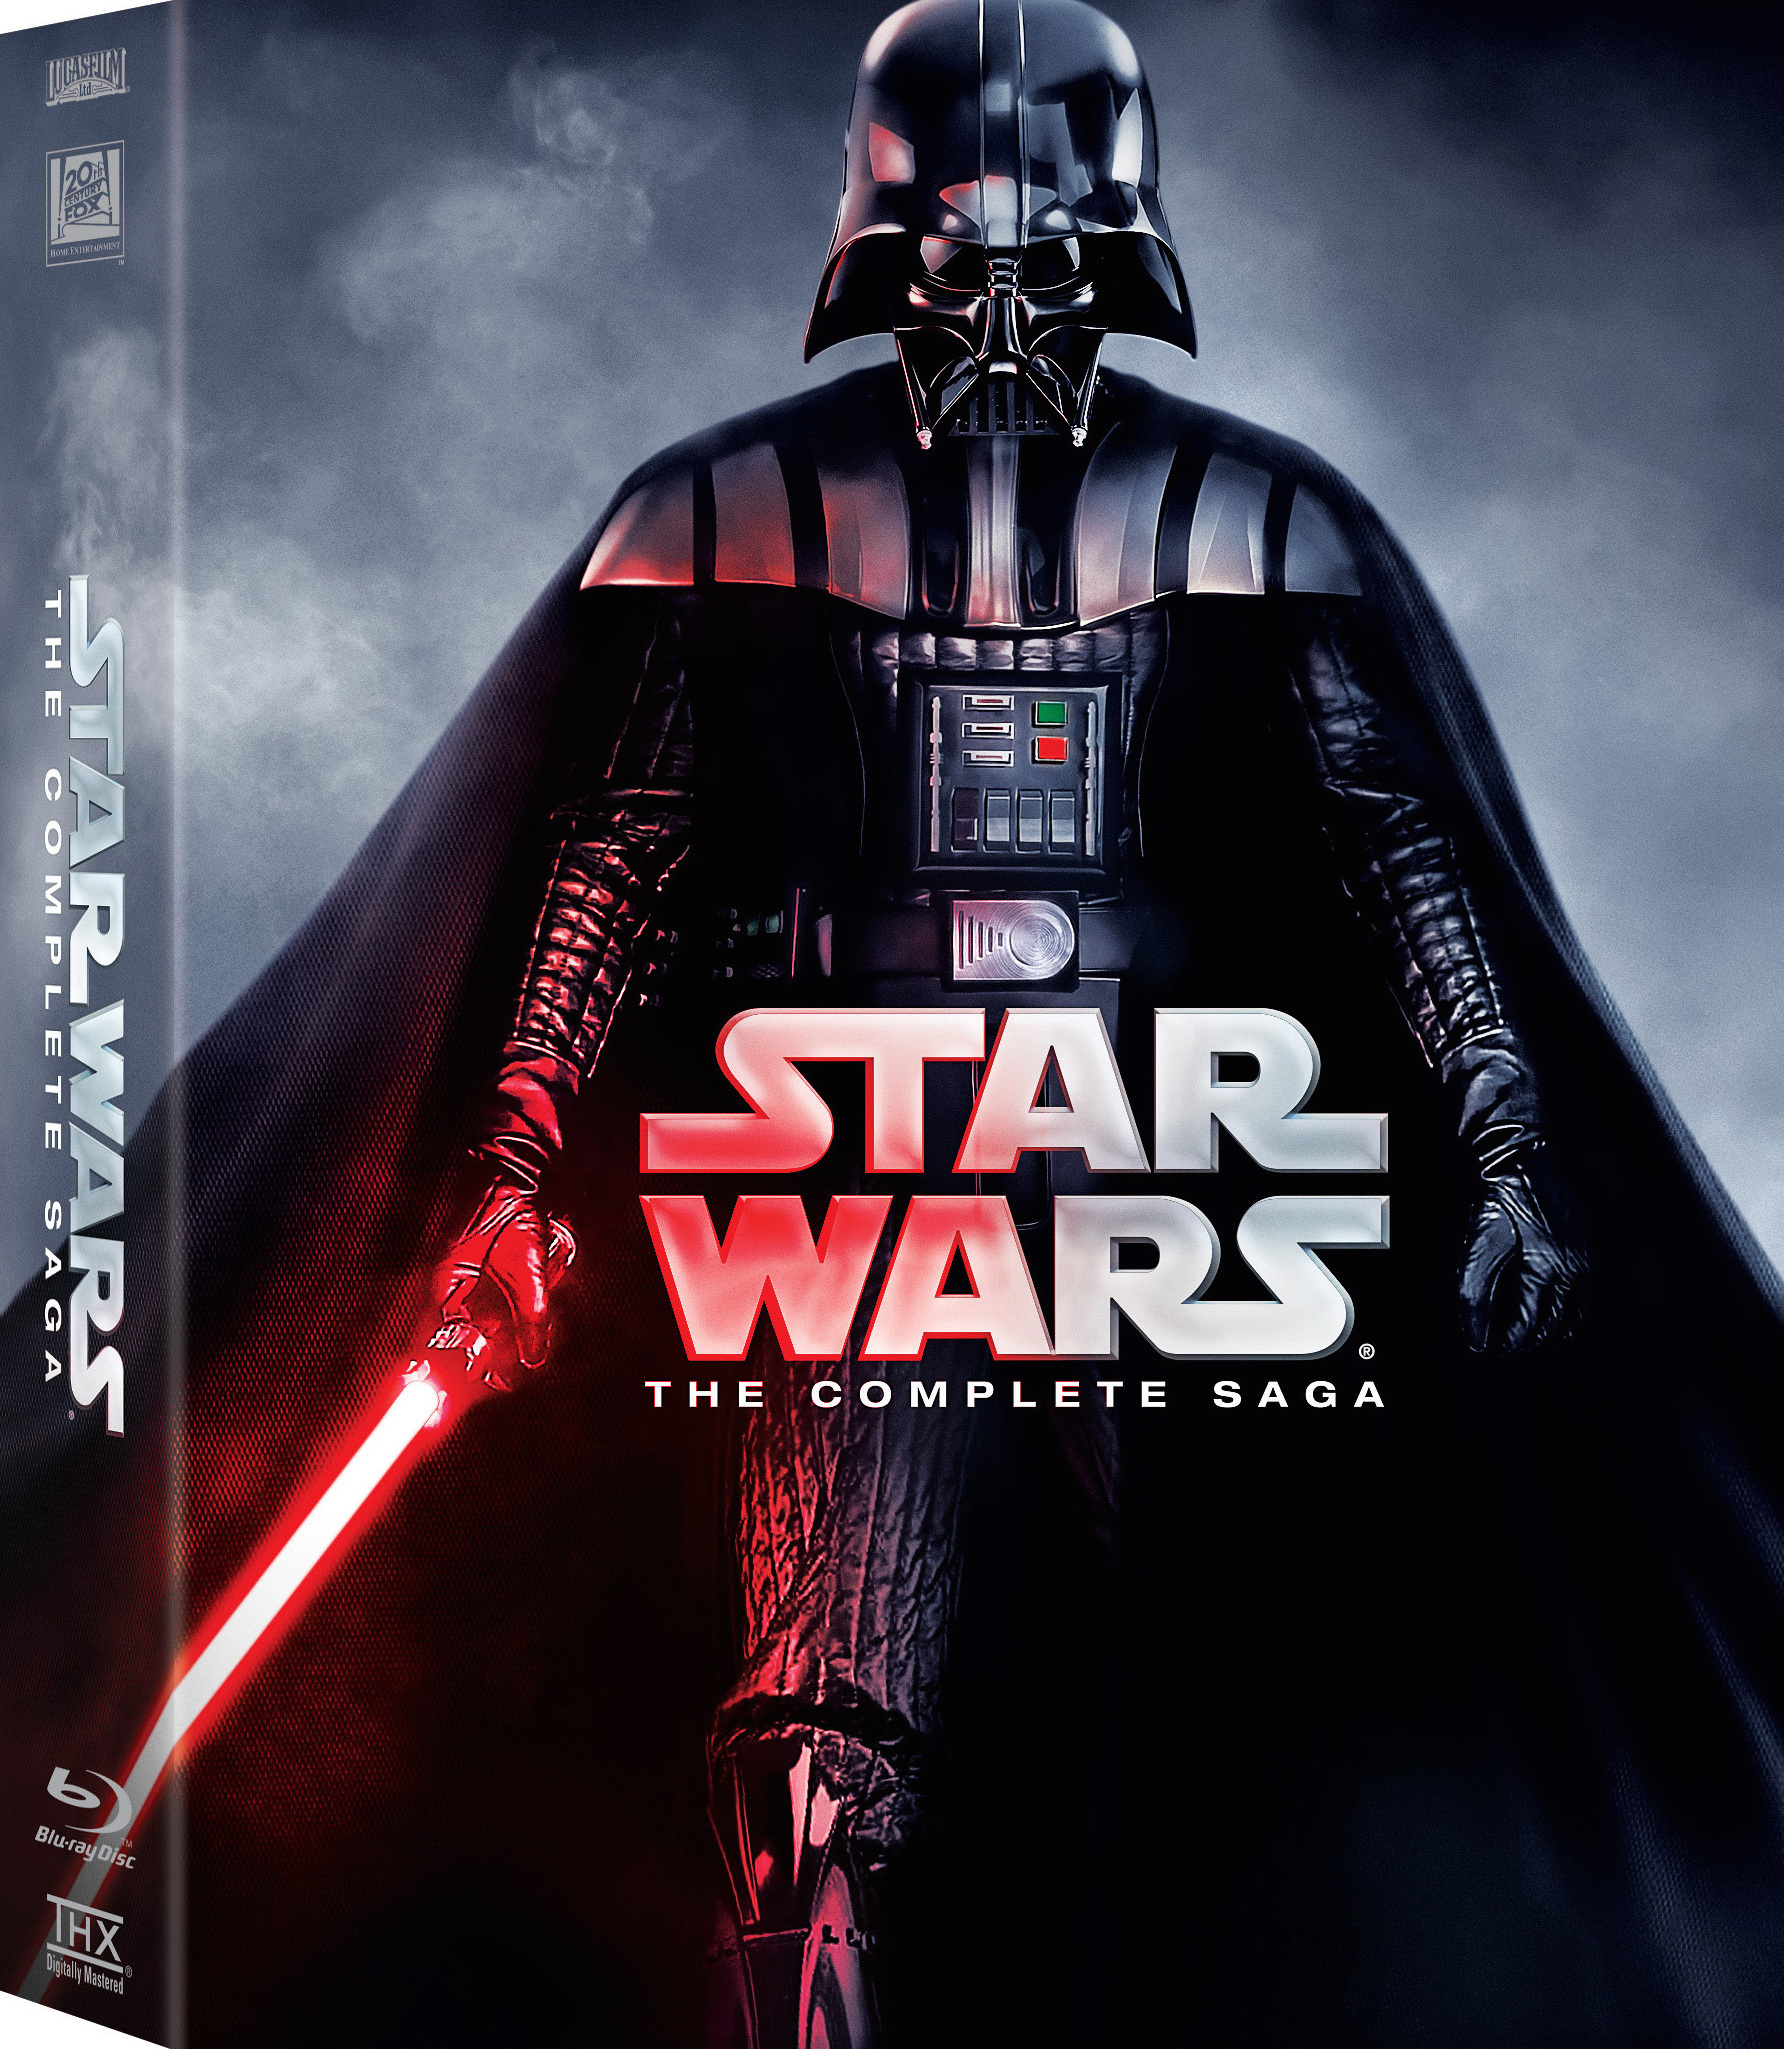 Star - Star Wars: The Complete Saga [Episodes I-VIII] (1977-2017) Star Wars: La Saga Completa [Episodios I-VIII] (1977-2017) [AC3 5.1 + SUP] [Blu Ray-Rip] 137947_front